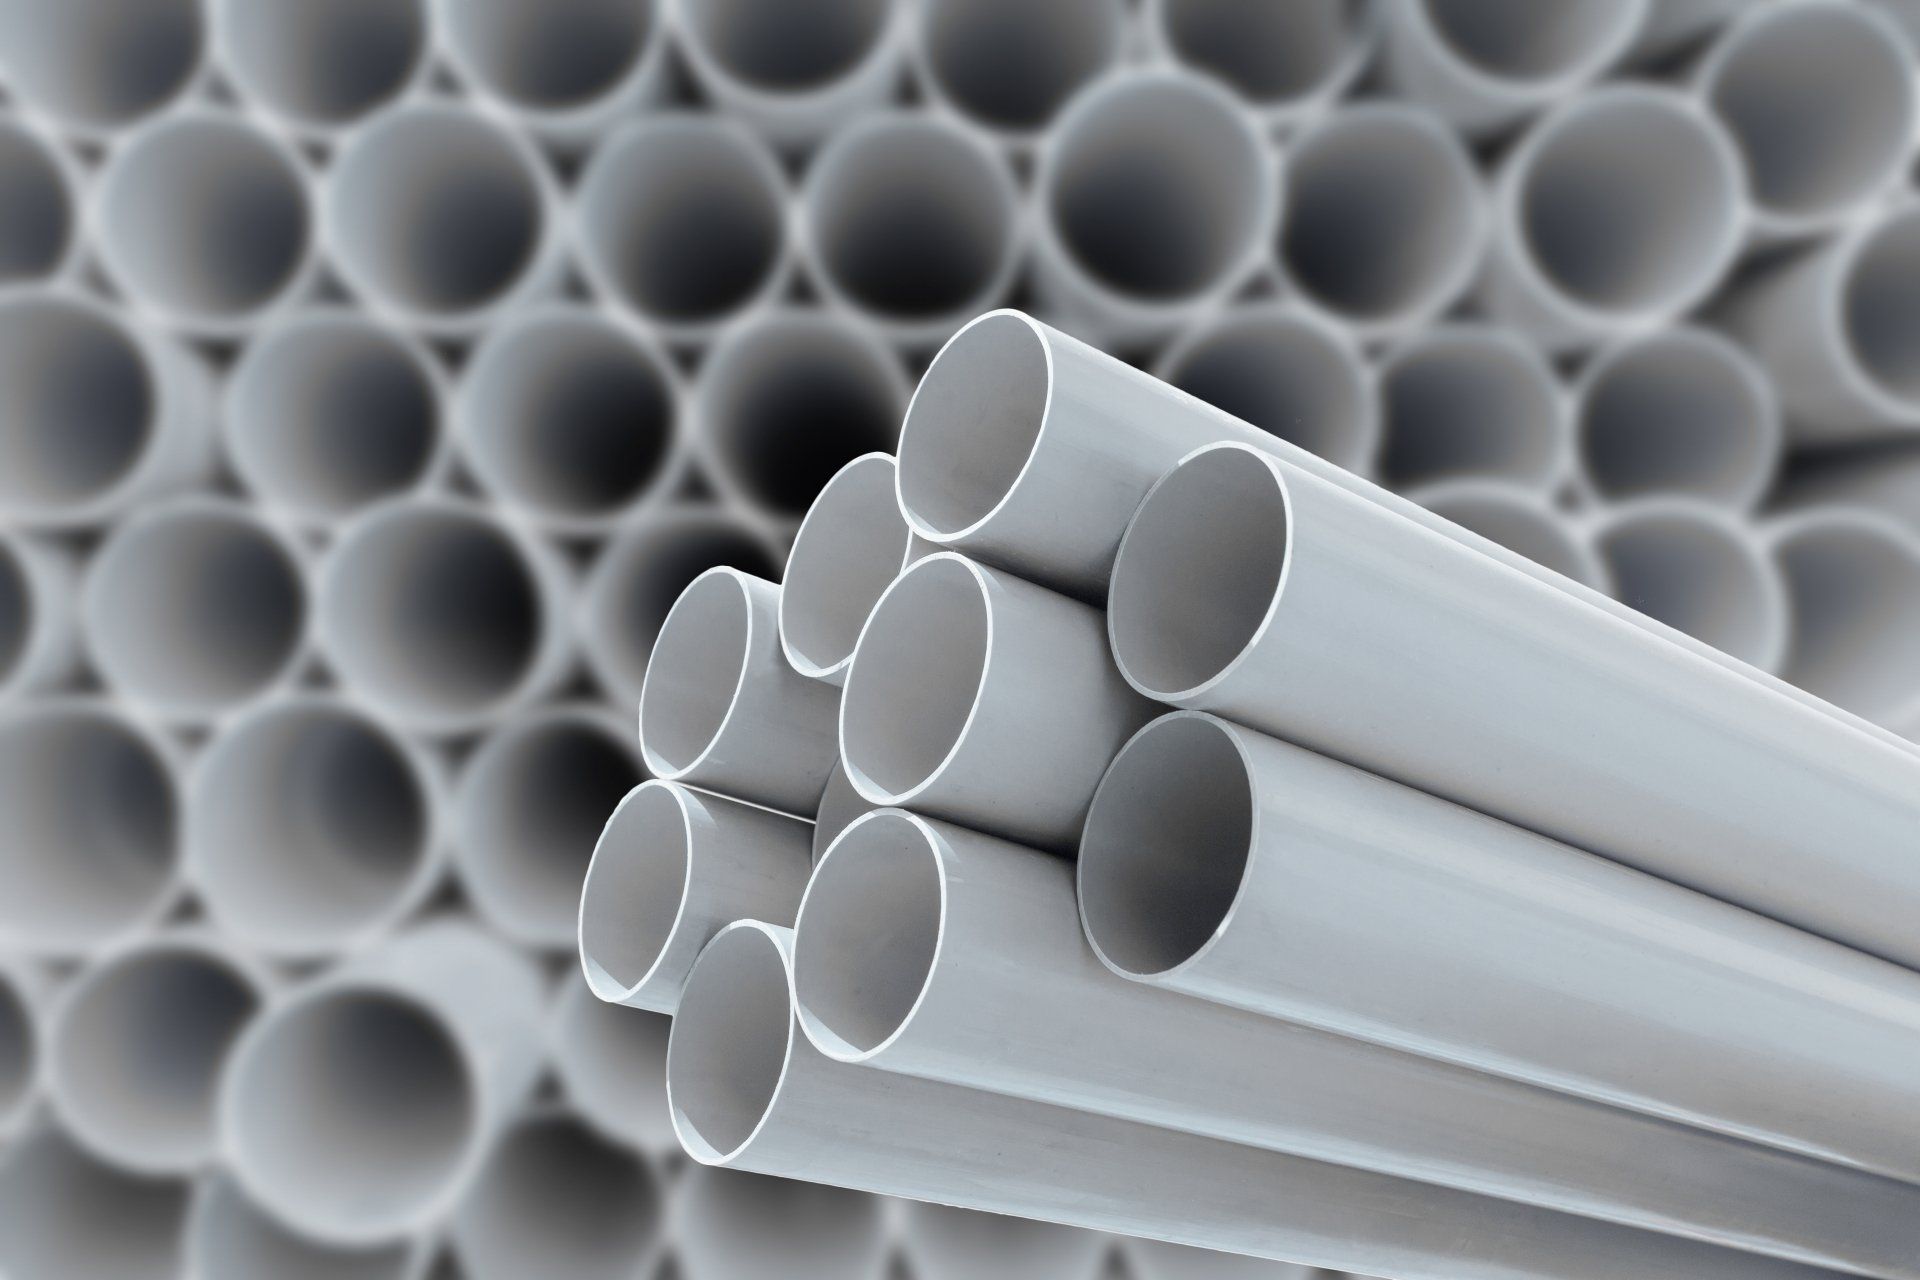 PVC Piping services